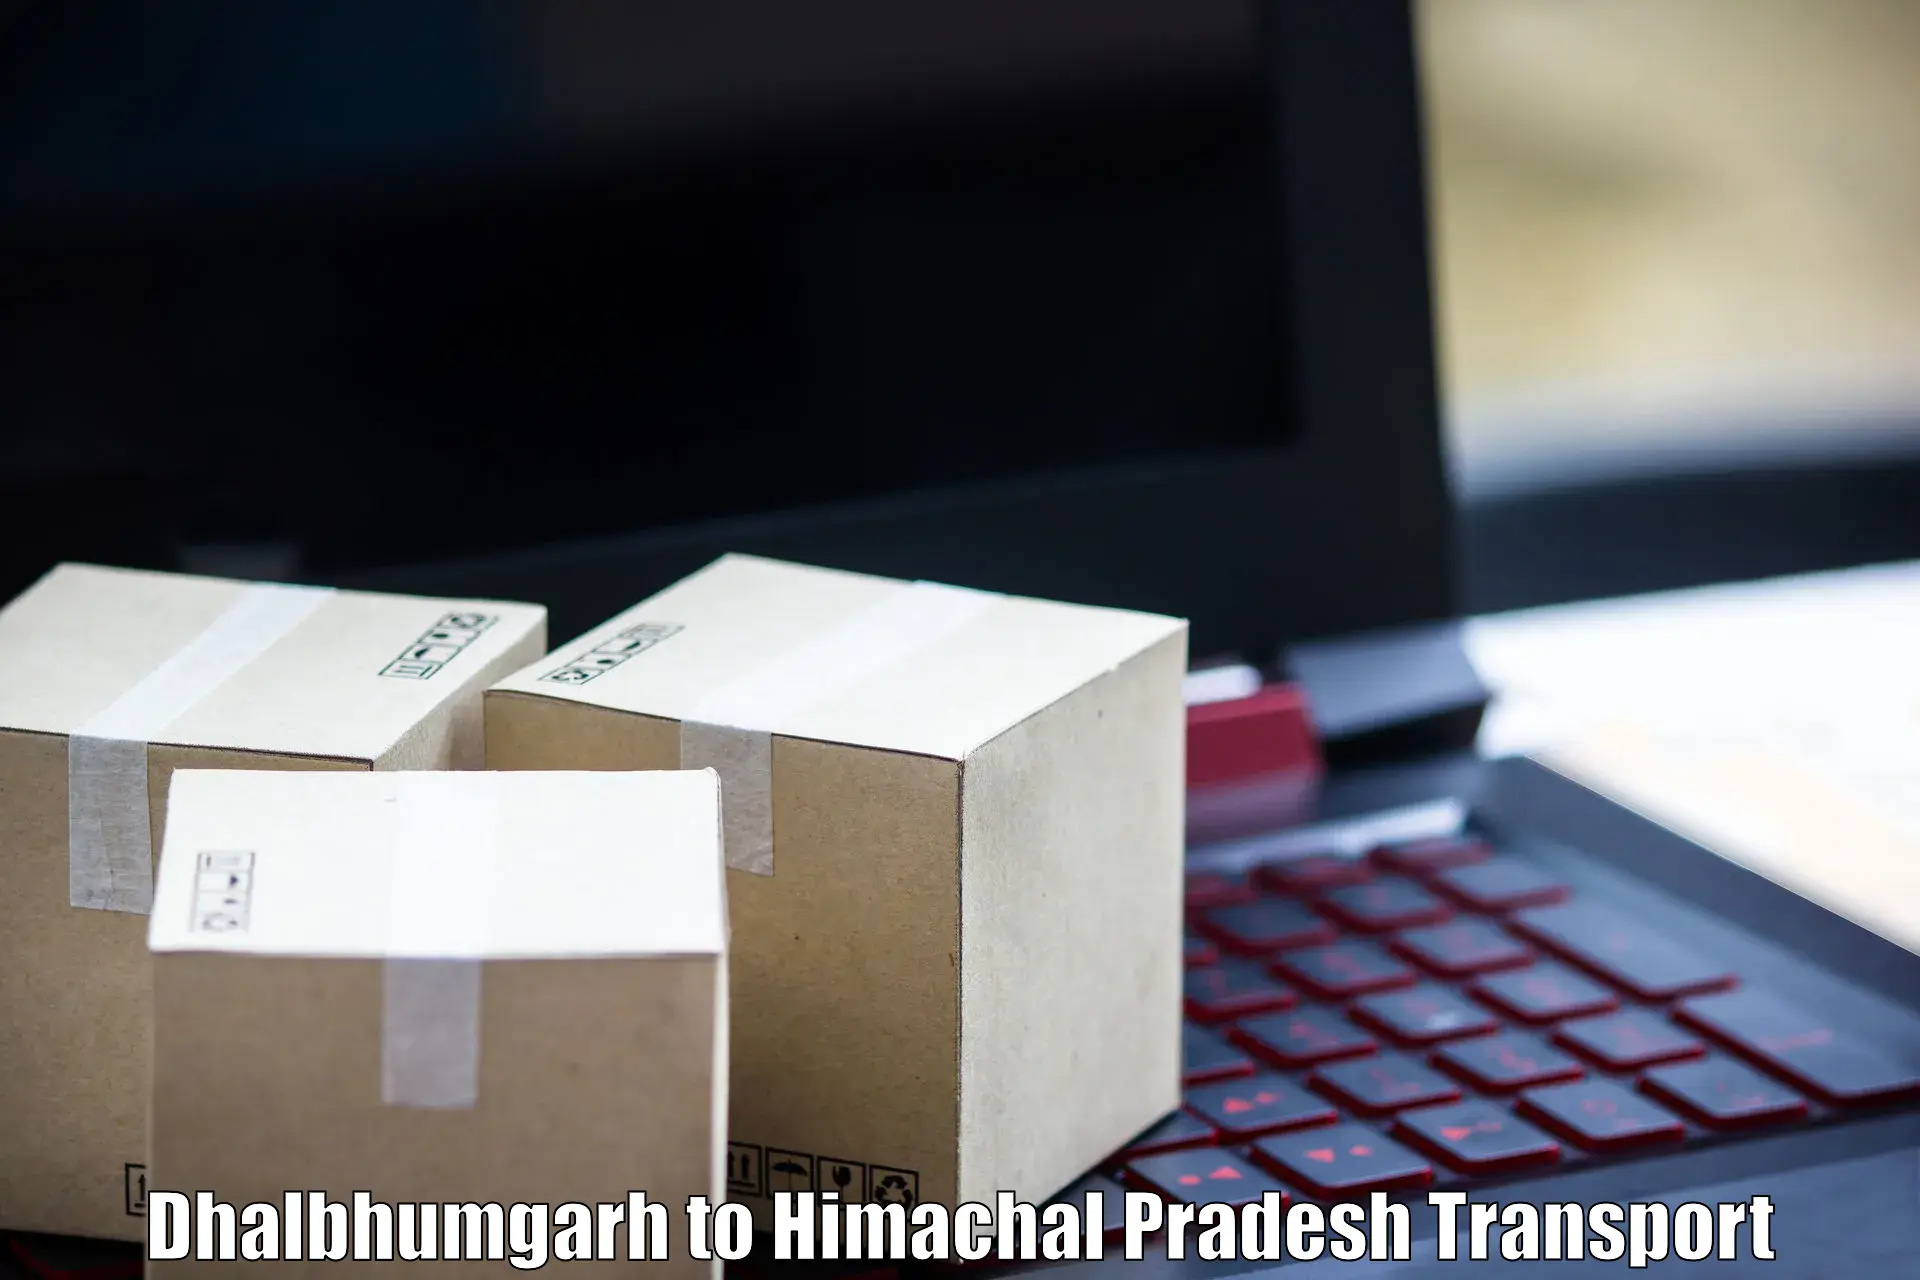 Express transport services Dhalbhumgarh to Darlaghat